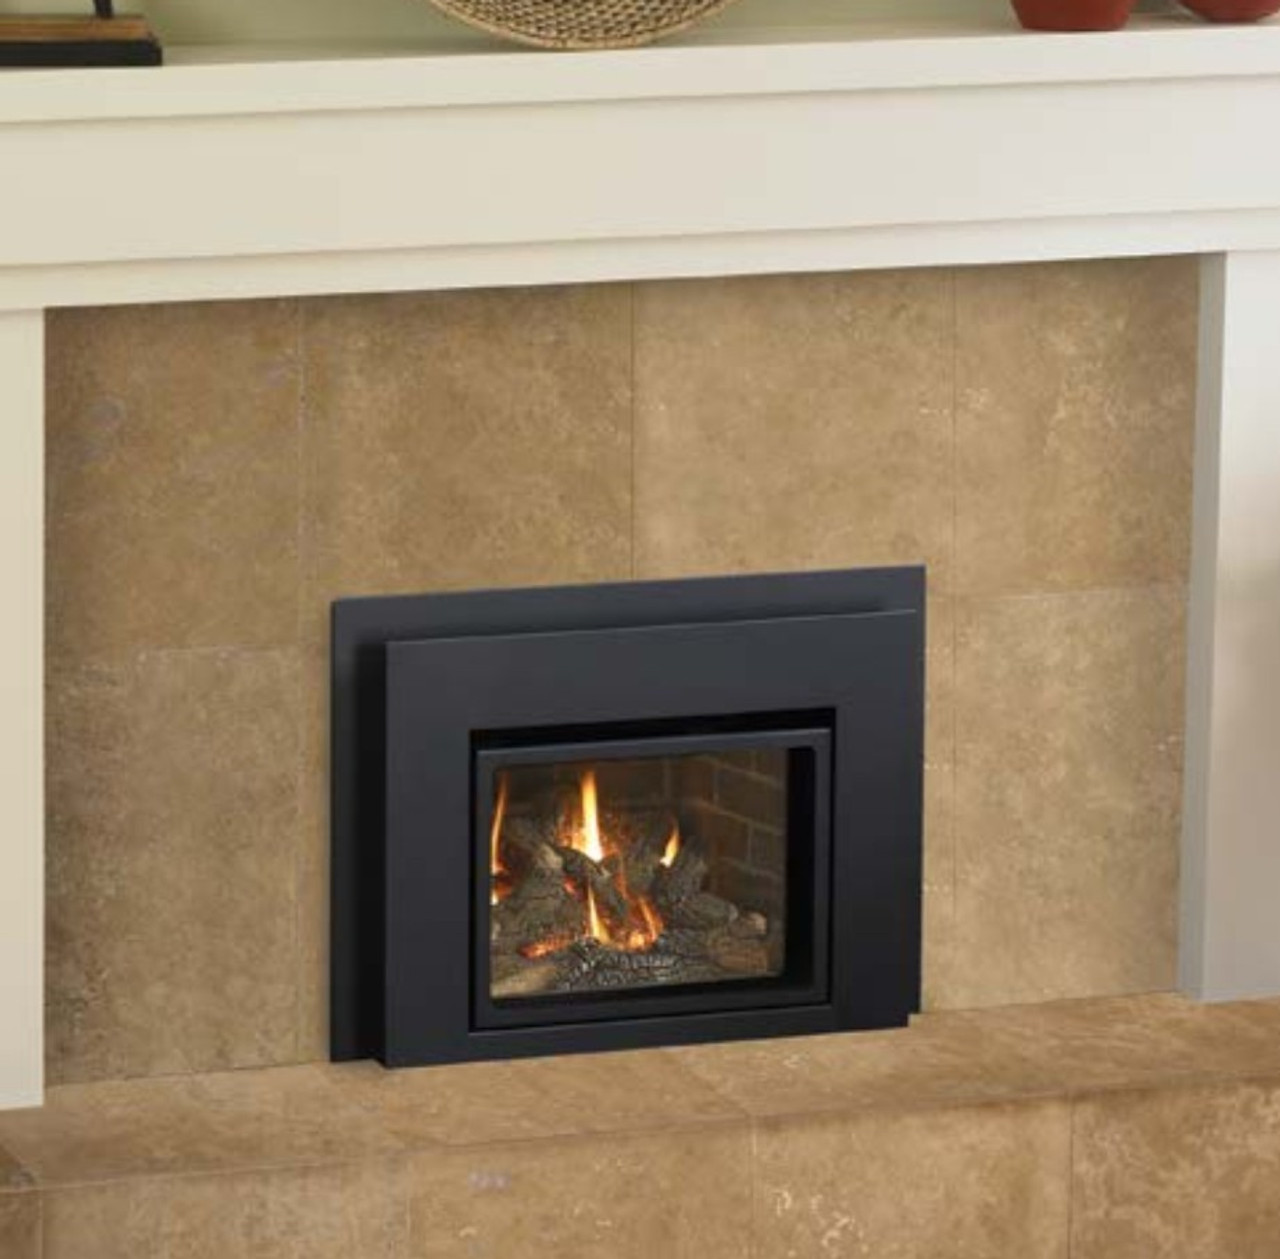 Lopi Gas Fireplace Inserts Reviews Fireplace Guide By Linda